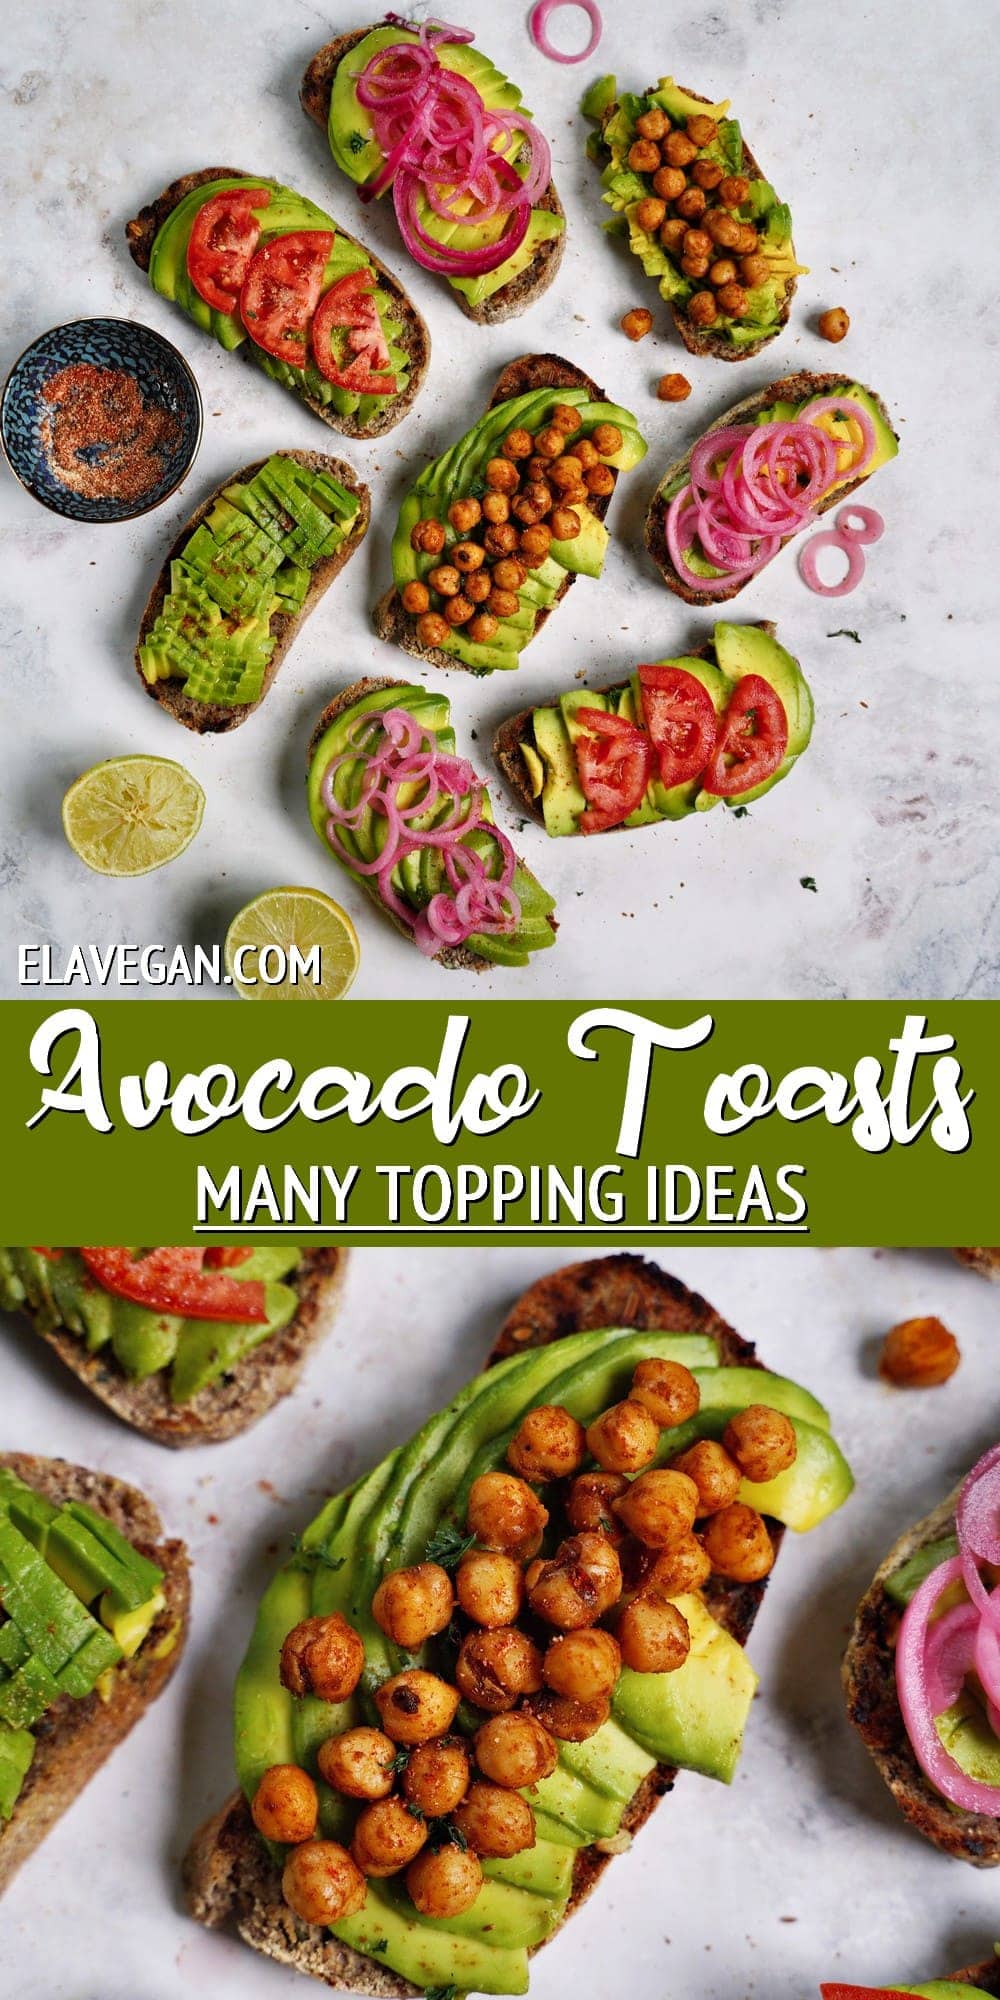 Pinterest Collage Avocado Toasts with many topping ideas